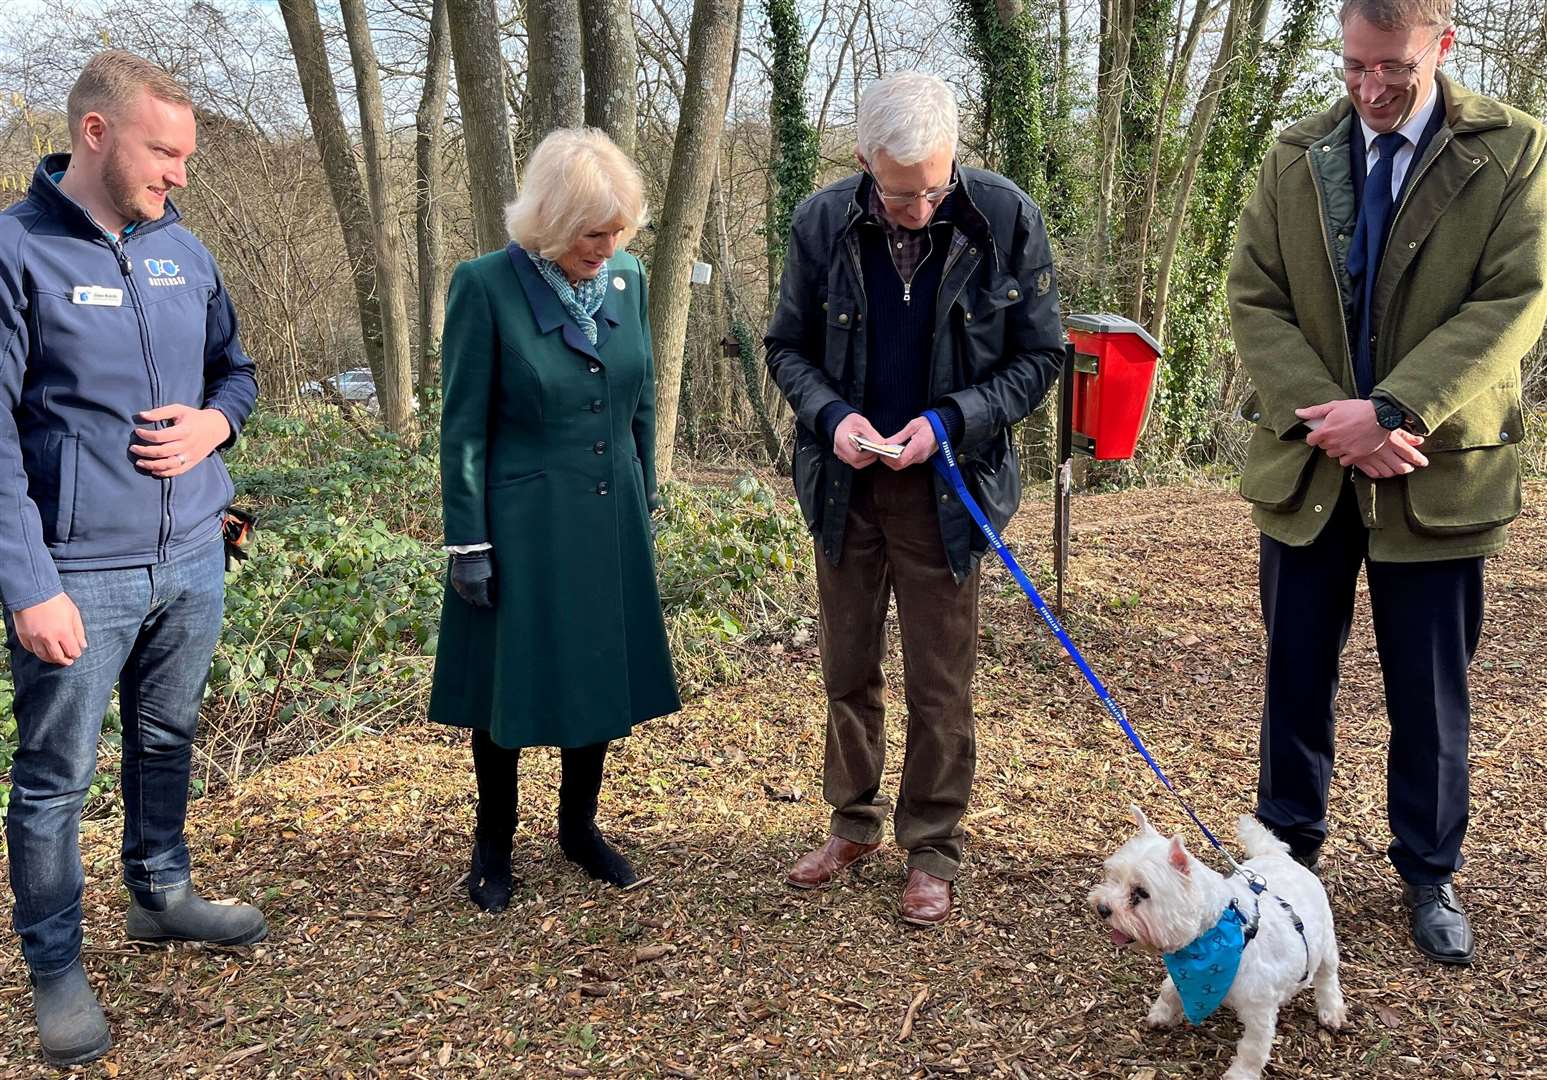 TV star Paul O’Grady shows the Duchess of Cornwall his pet dog at Battersea Dogs Home, Brands Hatch. Picture: KentLive